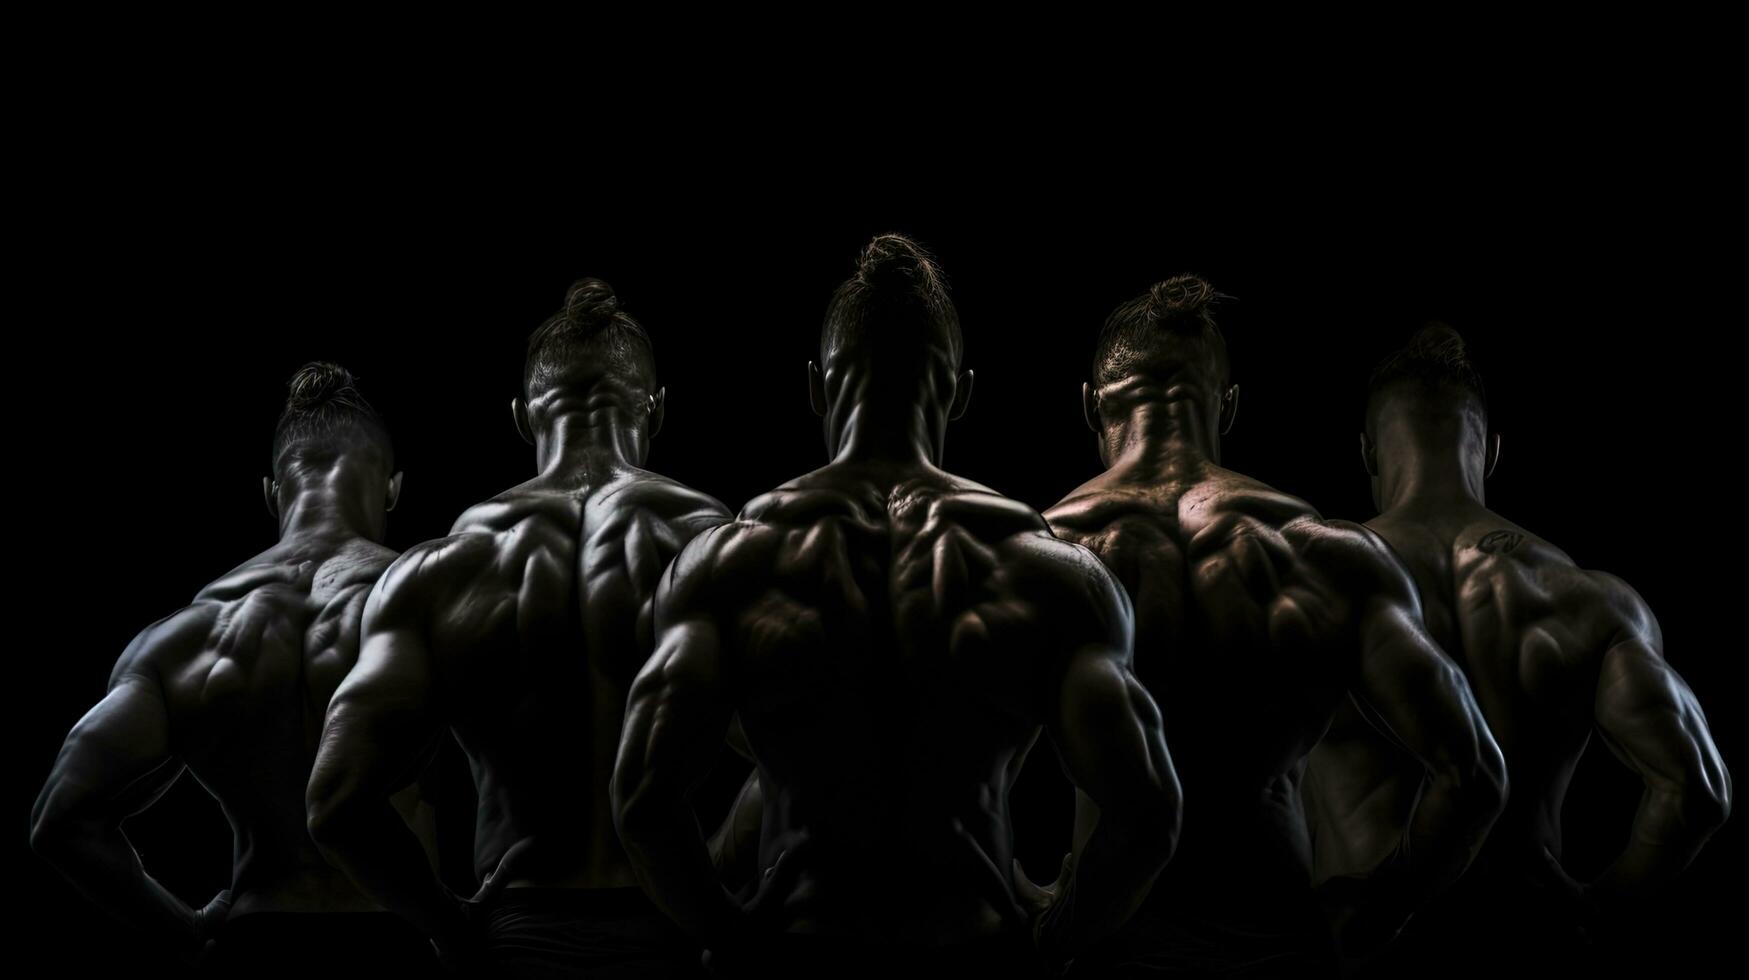 Artistic fitness on a black background showcasing a six pack and strong back muscles. silhouette concept photo